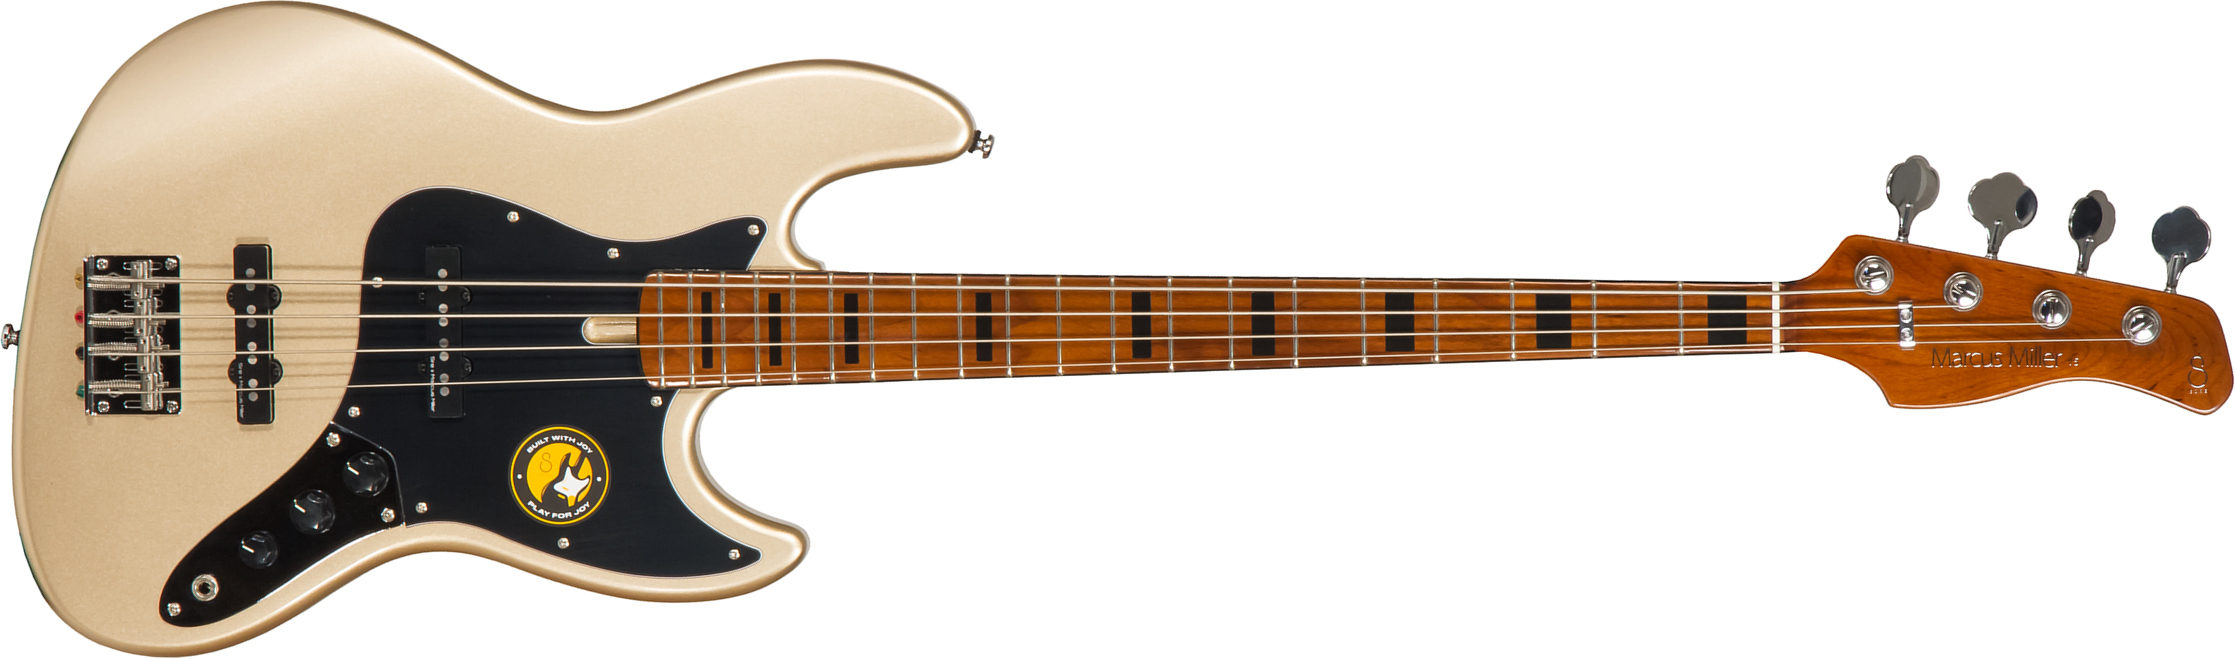 Marcus Miller V5 4st Mn - Champagne Gold Metallic - Solidbody E-bass - Main picture